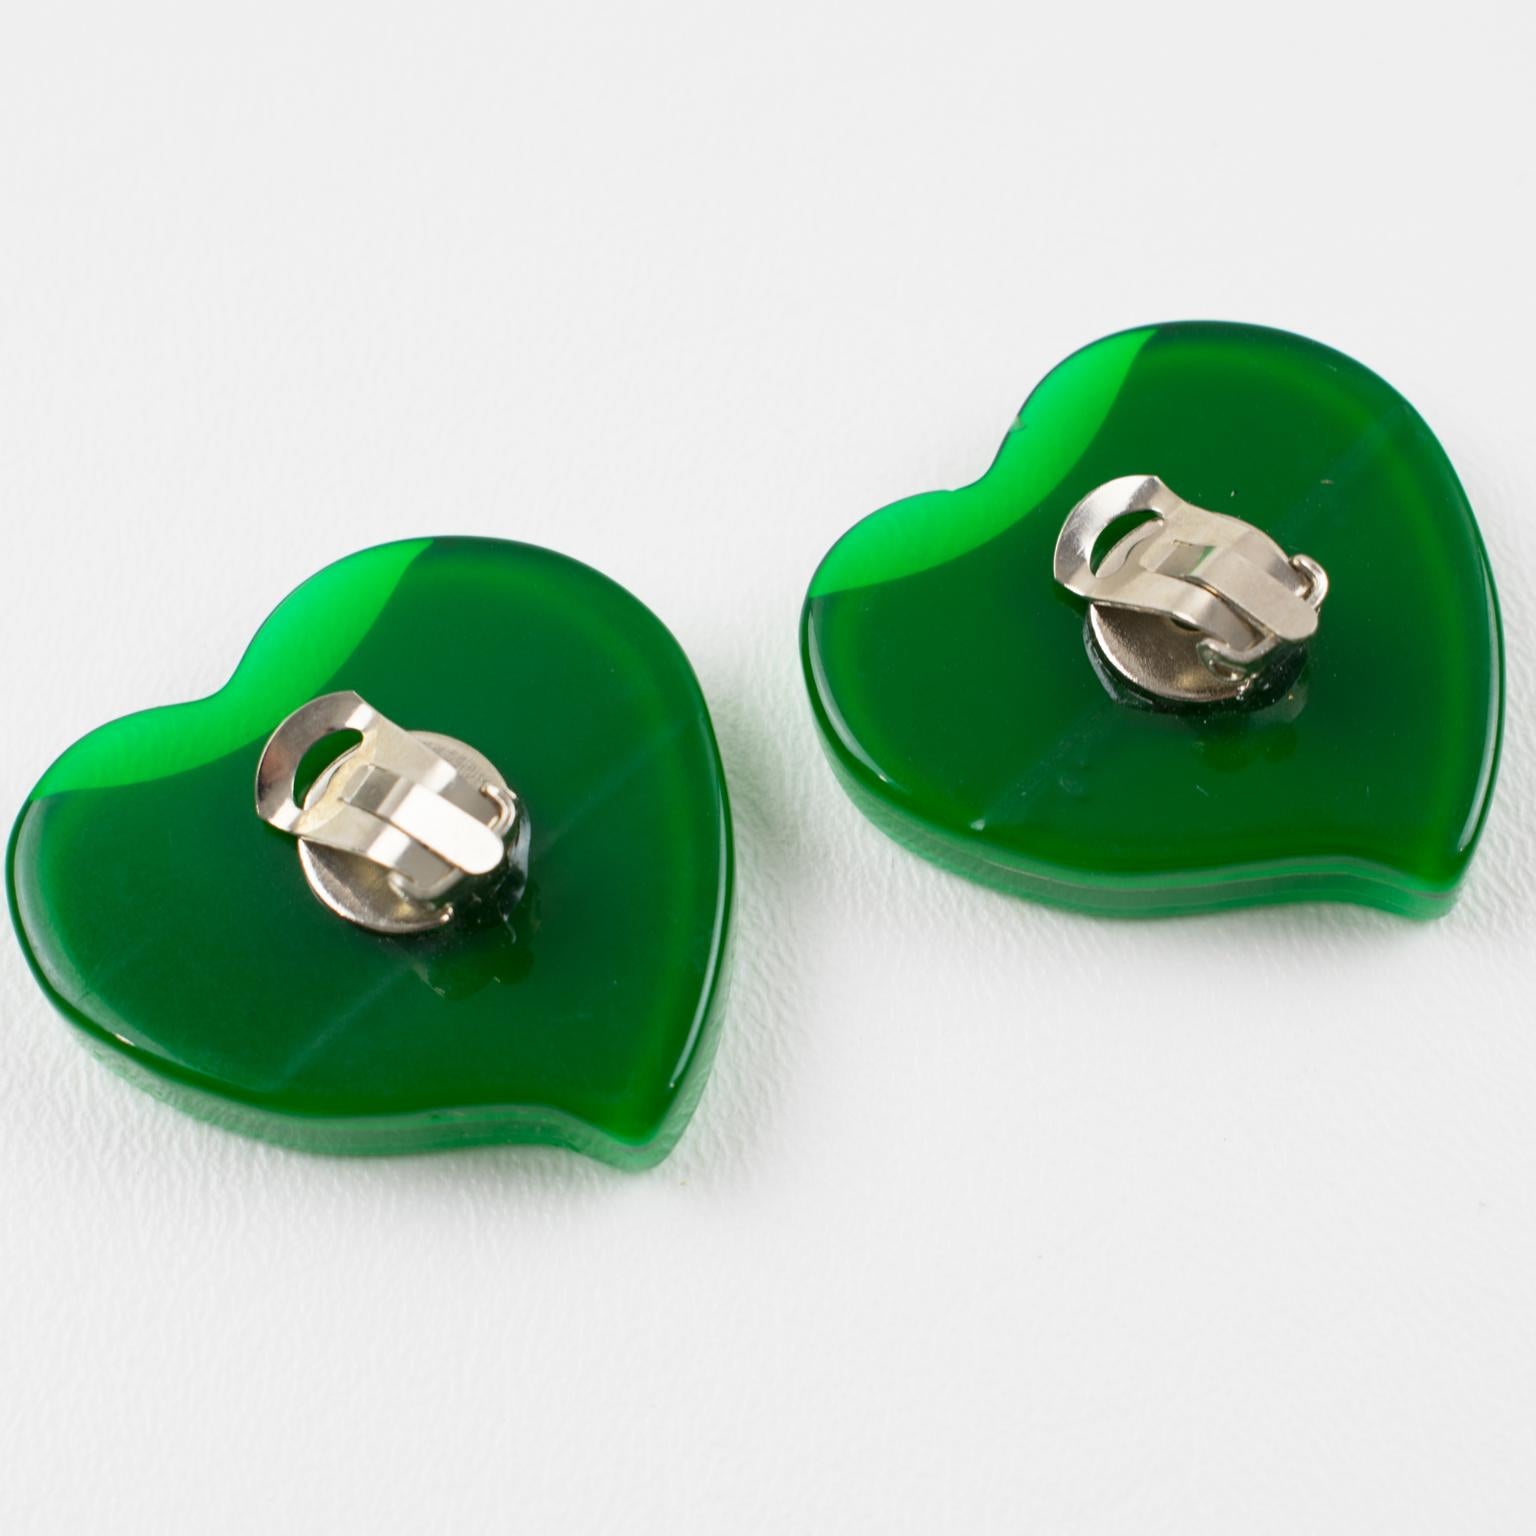 Pop Art Lucite Heart Clip Earrings in Green Shade In Excellent Condition For Sale In Atlanta, GA